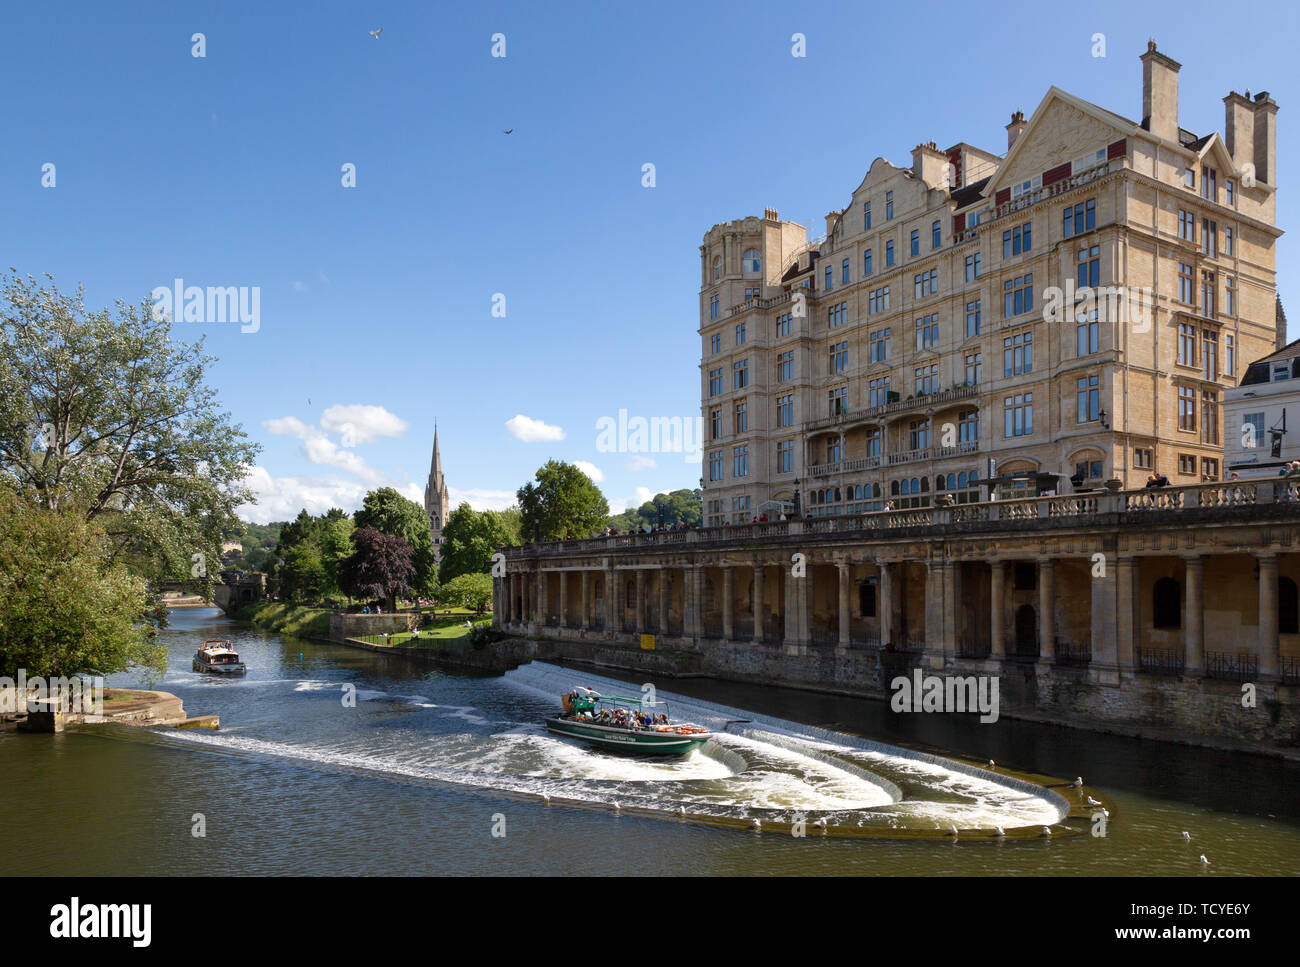 Bath England - Pulteney Weir and buildings on the River Avon in summer sunshine, UNESCO world heritage site, Bath Somerset UK Stock Photo